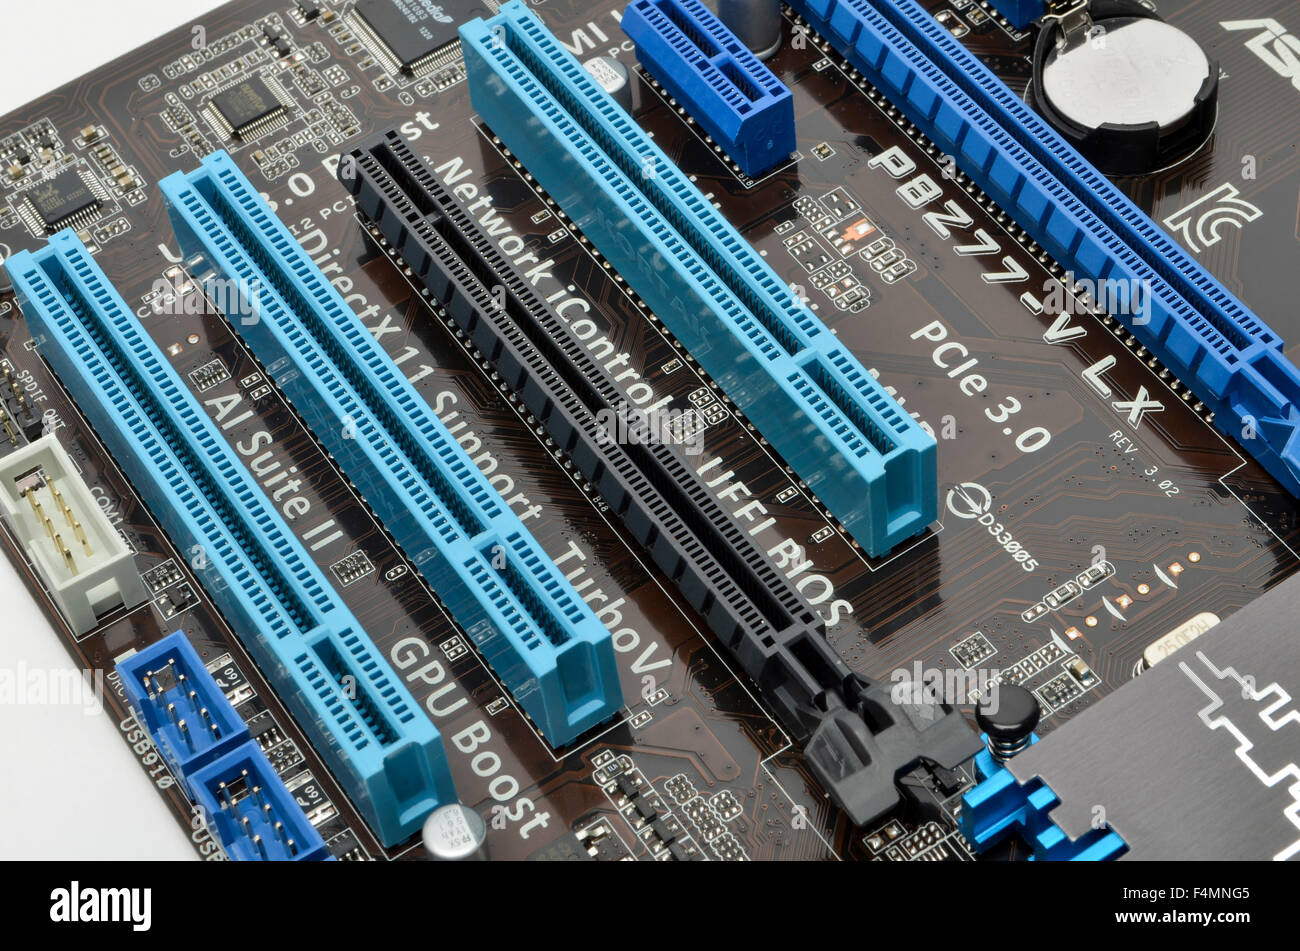 PCI Express expansion and graphics slots on an ASUS motherboard. Stock Photo